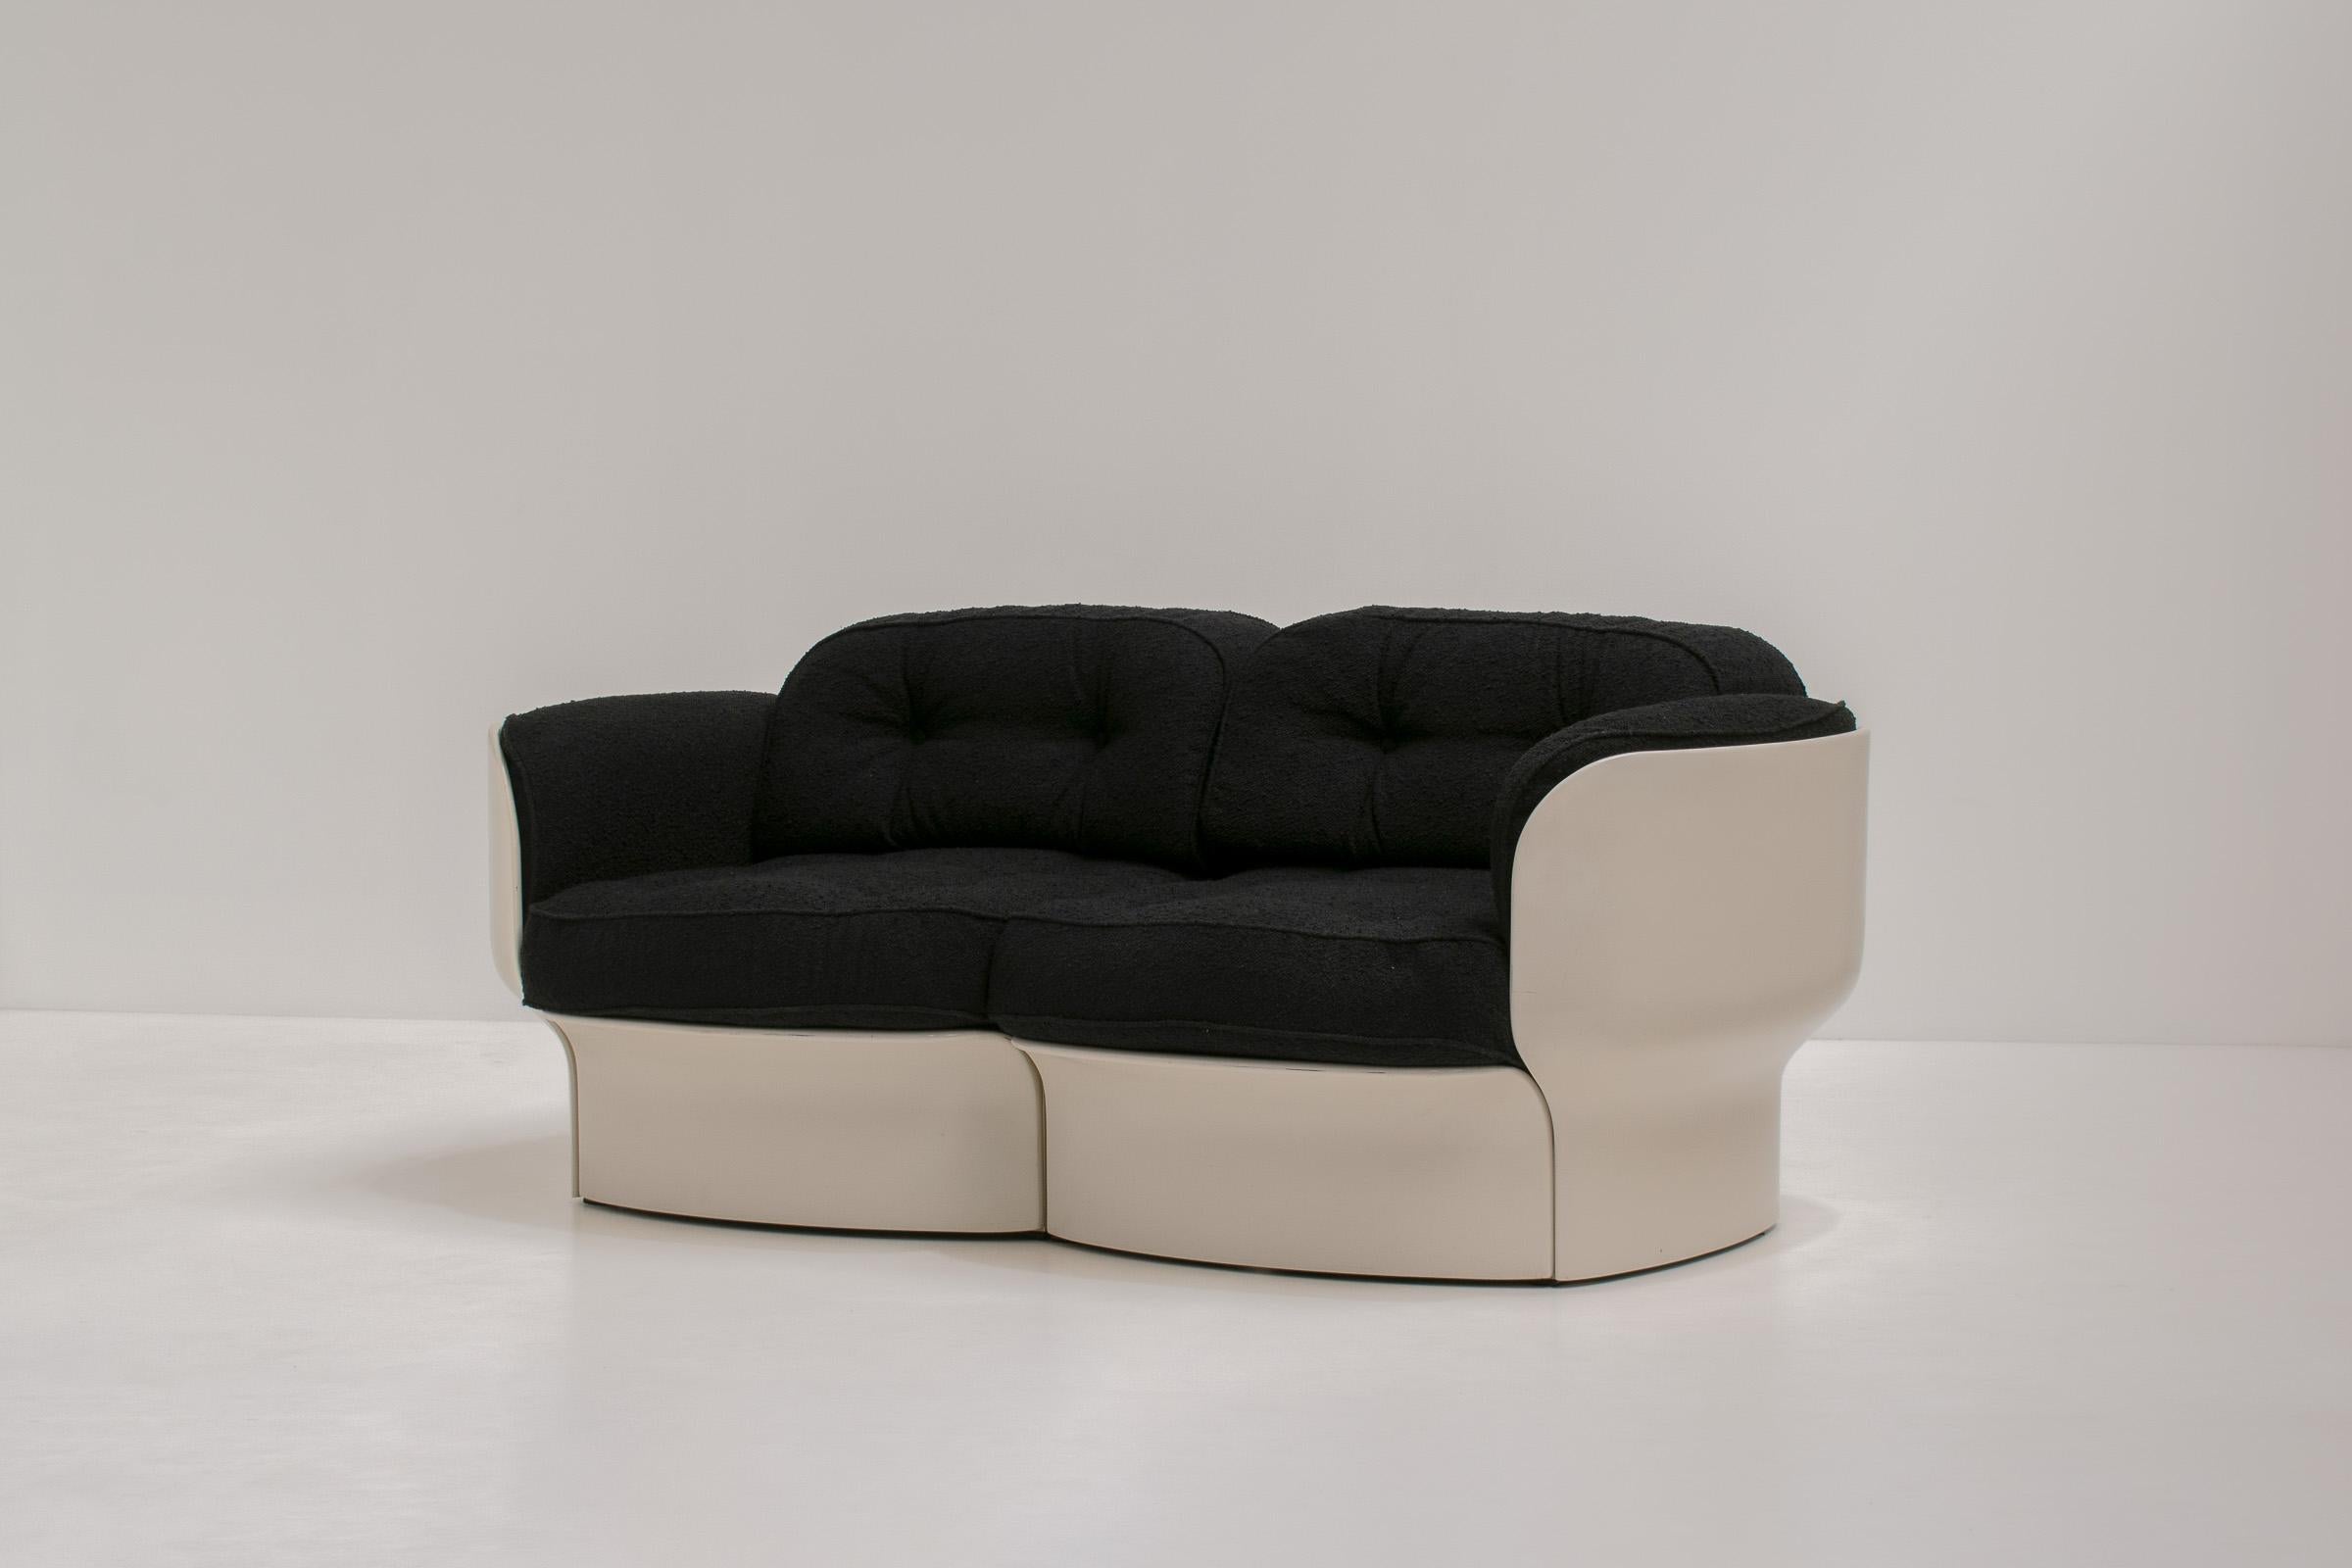 Peter Ghyczy's exceptional 2-seater sofa from the 1970s is an incredibly rare and truly unique piece. Also referred to as the 